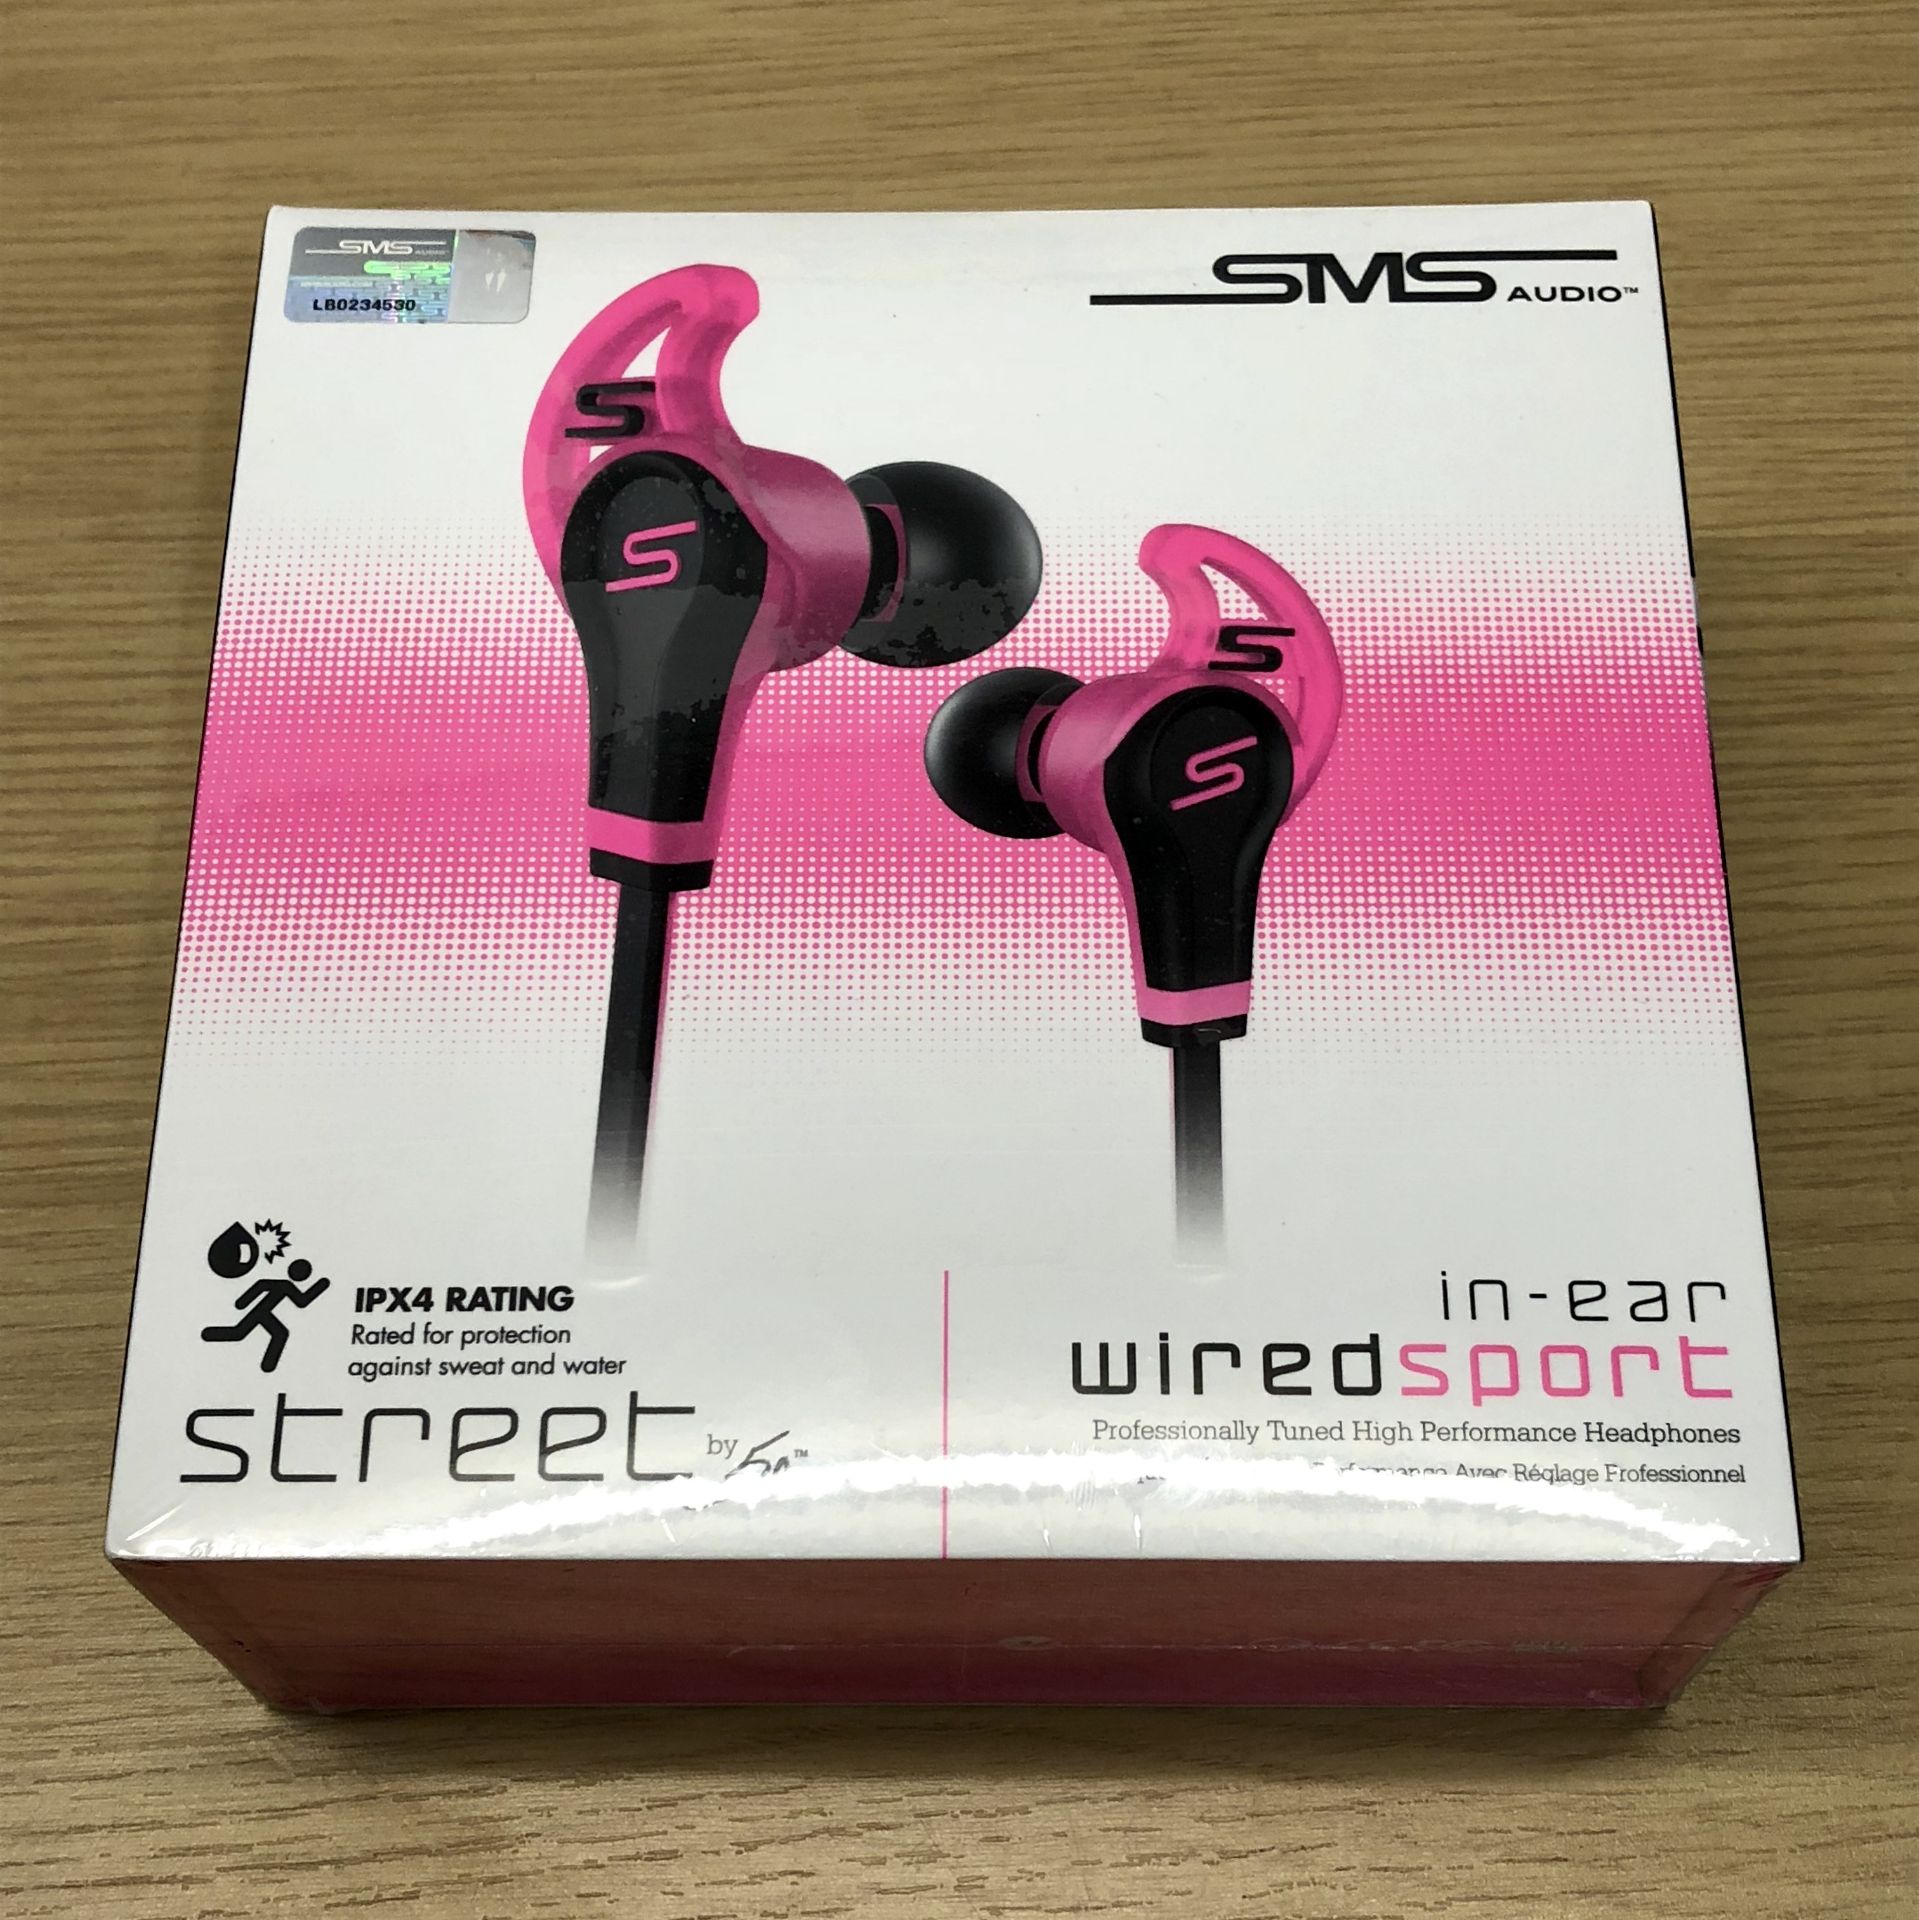 V Brand New SMS Audio Street By 50 Cent Sport Earphones - RRP £59.99 - Professionally Tuned High - Image 2 of 3